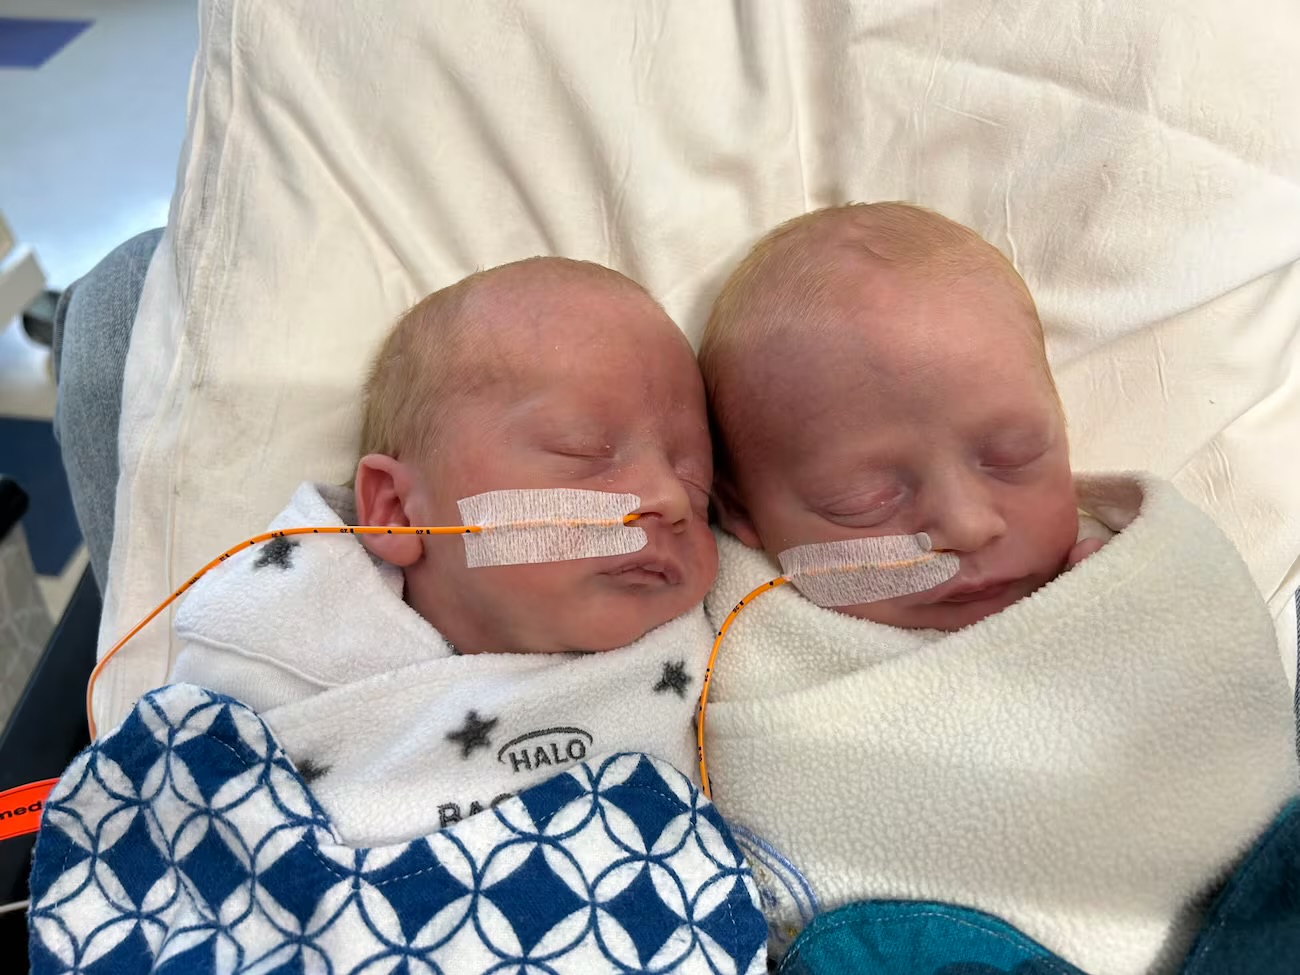 Newborn Twins Fight Rare Disease, Family Says It’ll Cost $4.2 Million To Save Their Lives